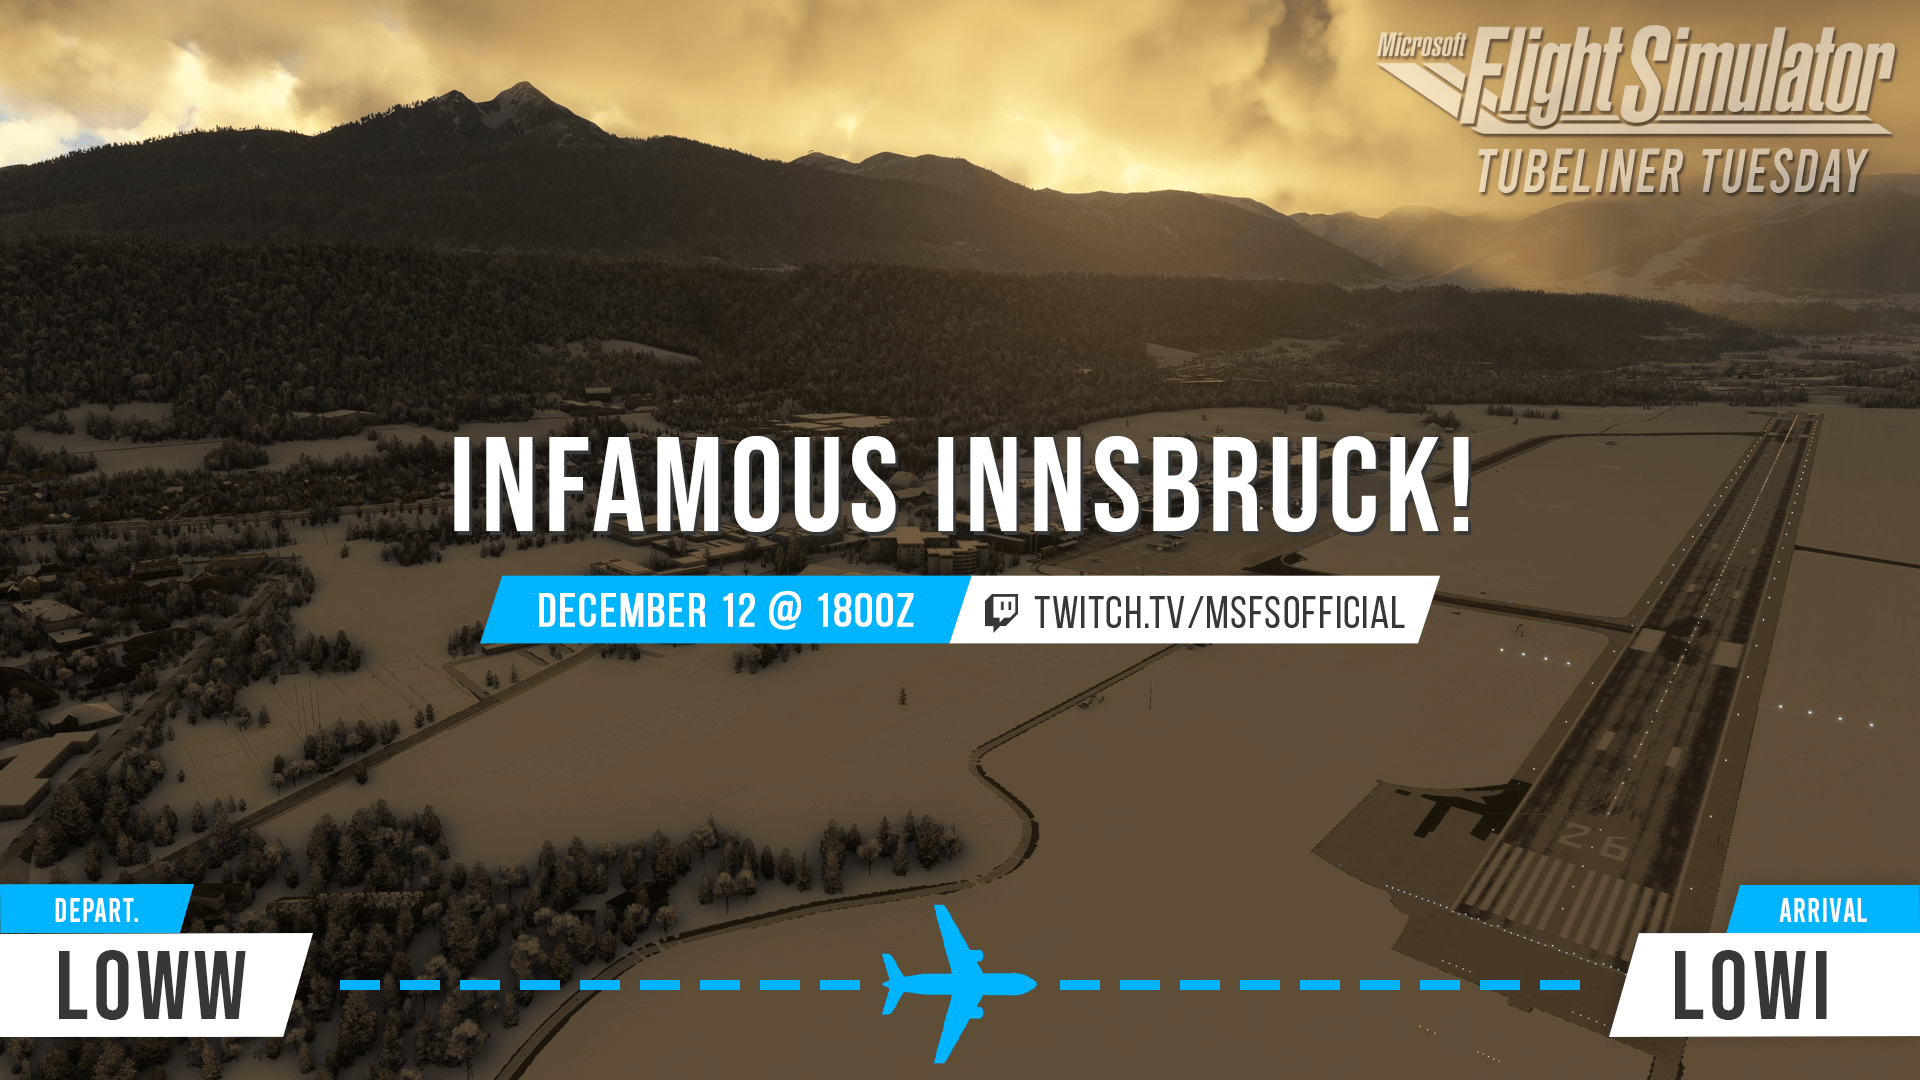 Tubeliner Tuesday - Infamous Innsbruck - December 12 @ 1800Z twitch.tv/msfsofficial